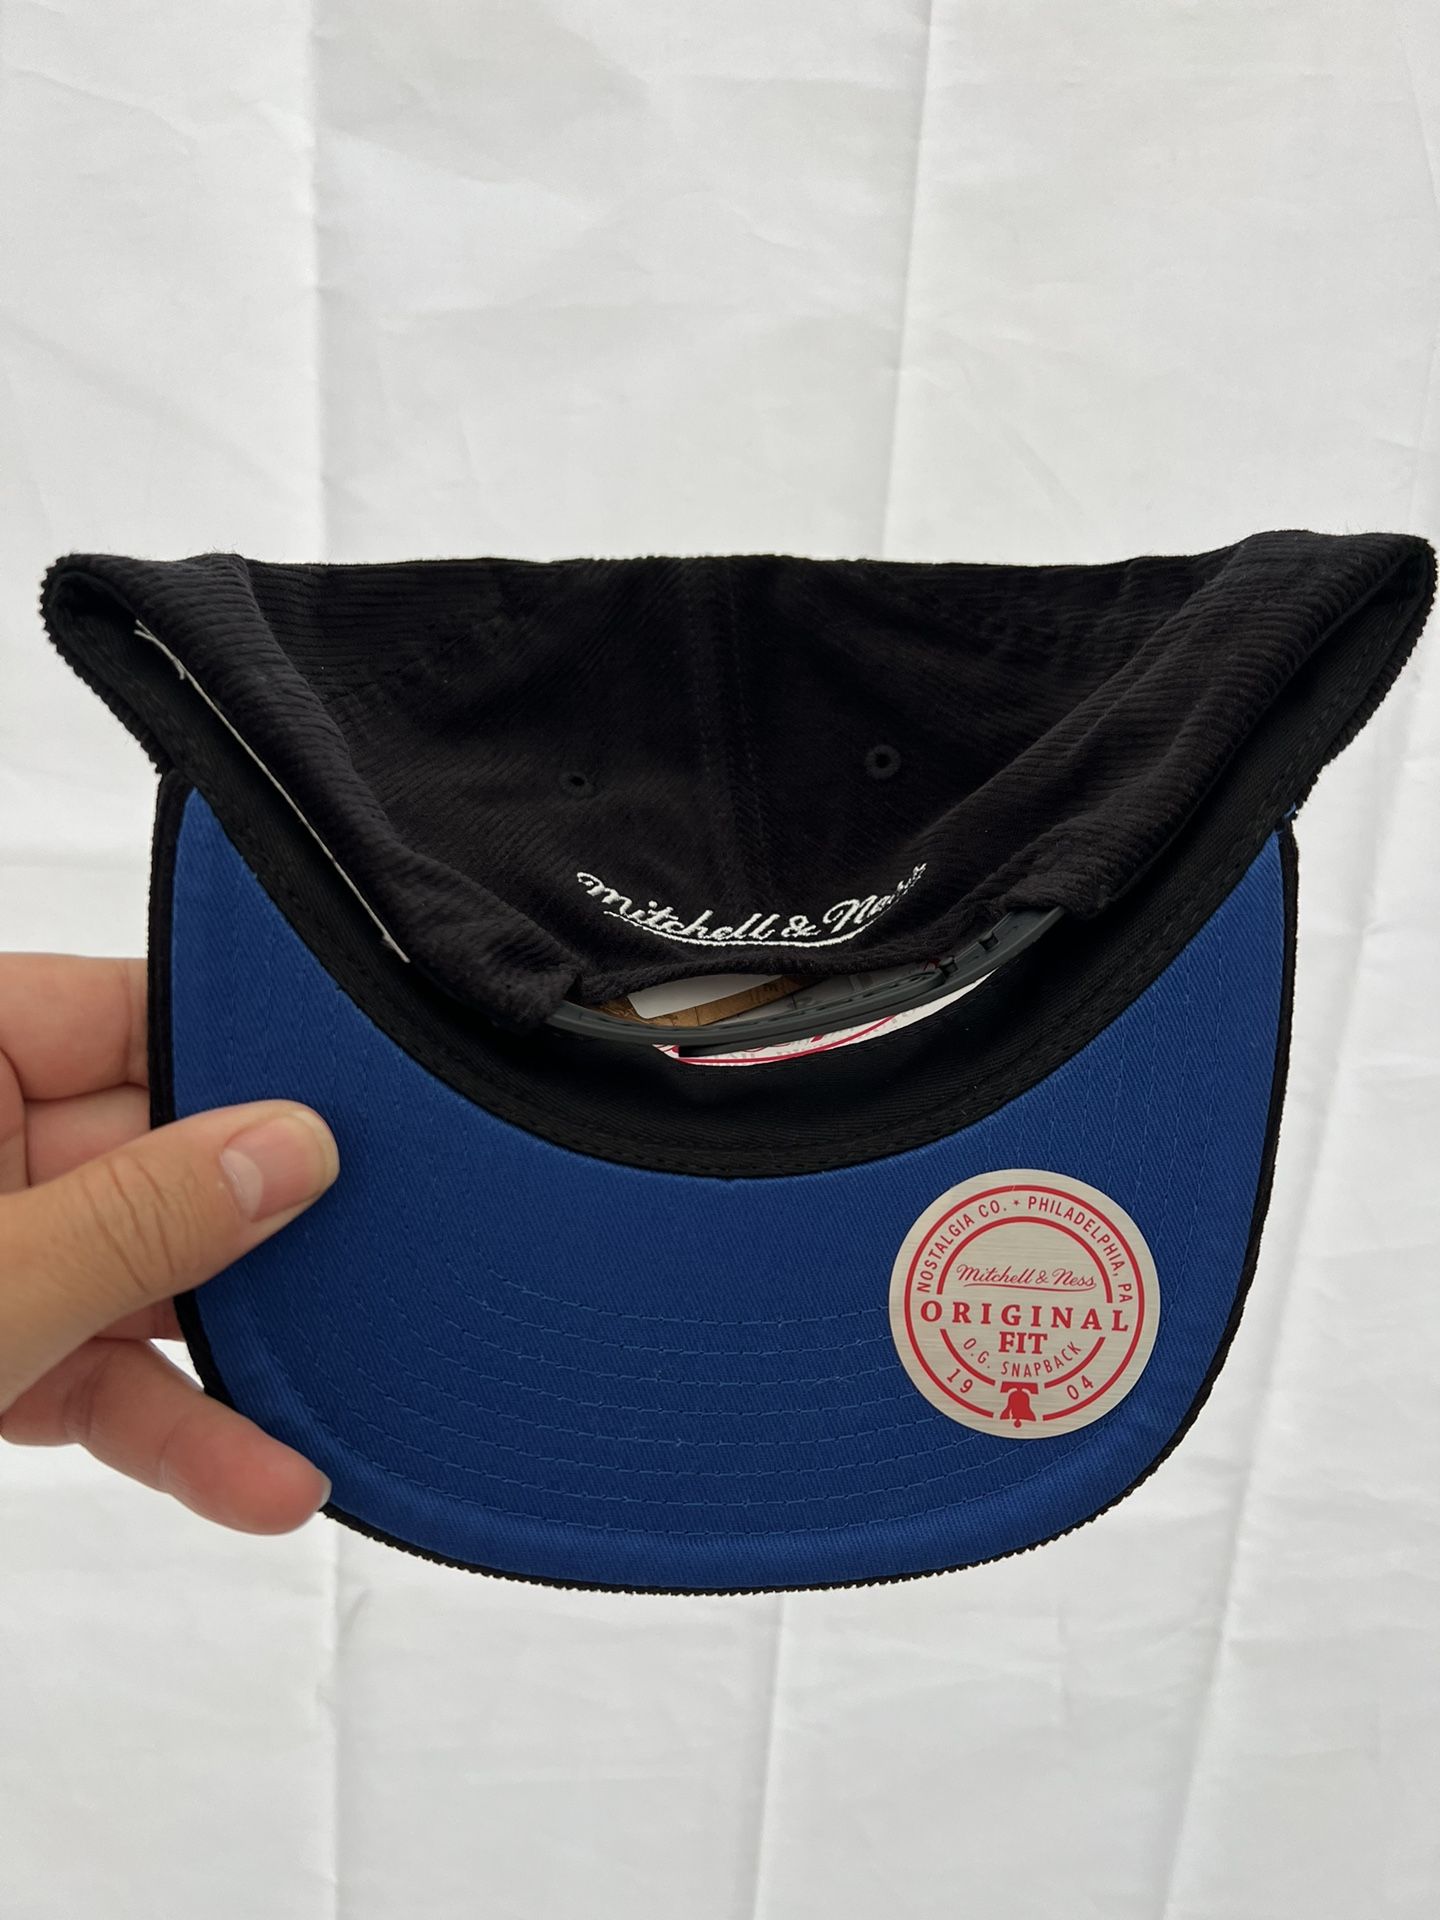 New Denver Nuggets Mitchell & Ness Black Corduroy SnapBack Hat Cap NBA for  Sale in Anaheim, CA - OfferUp